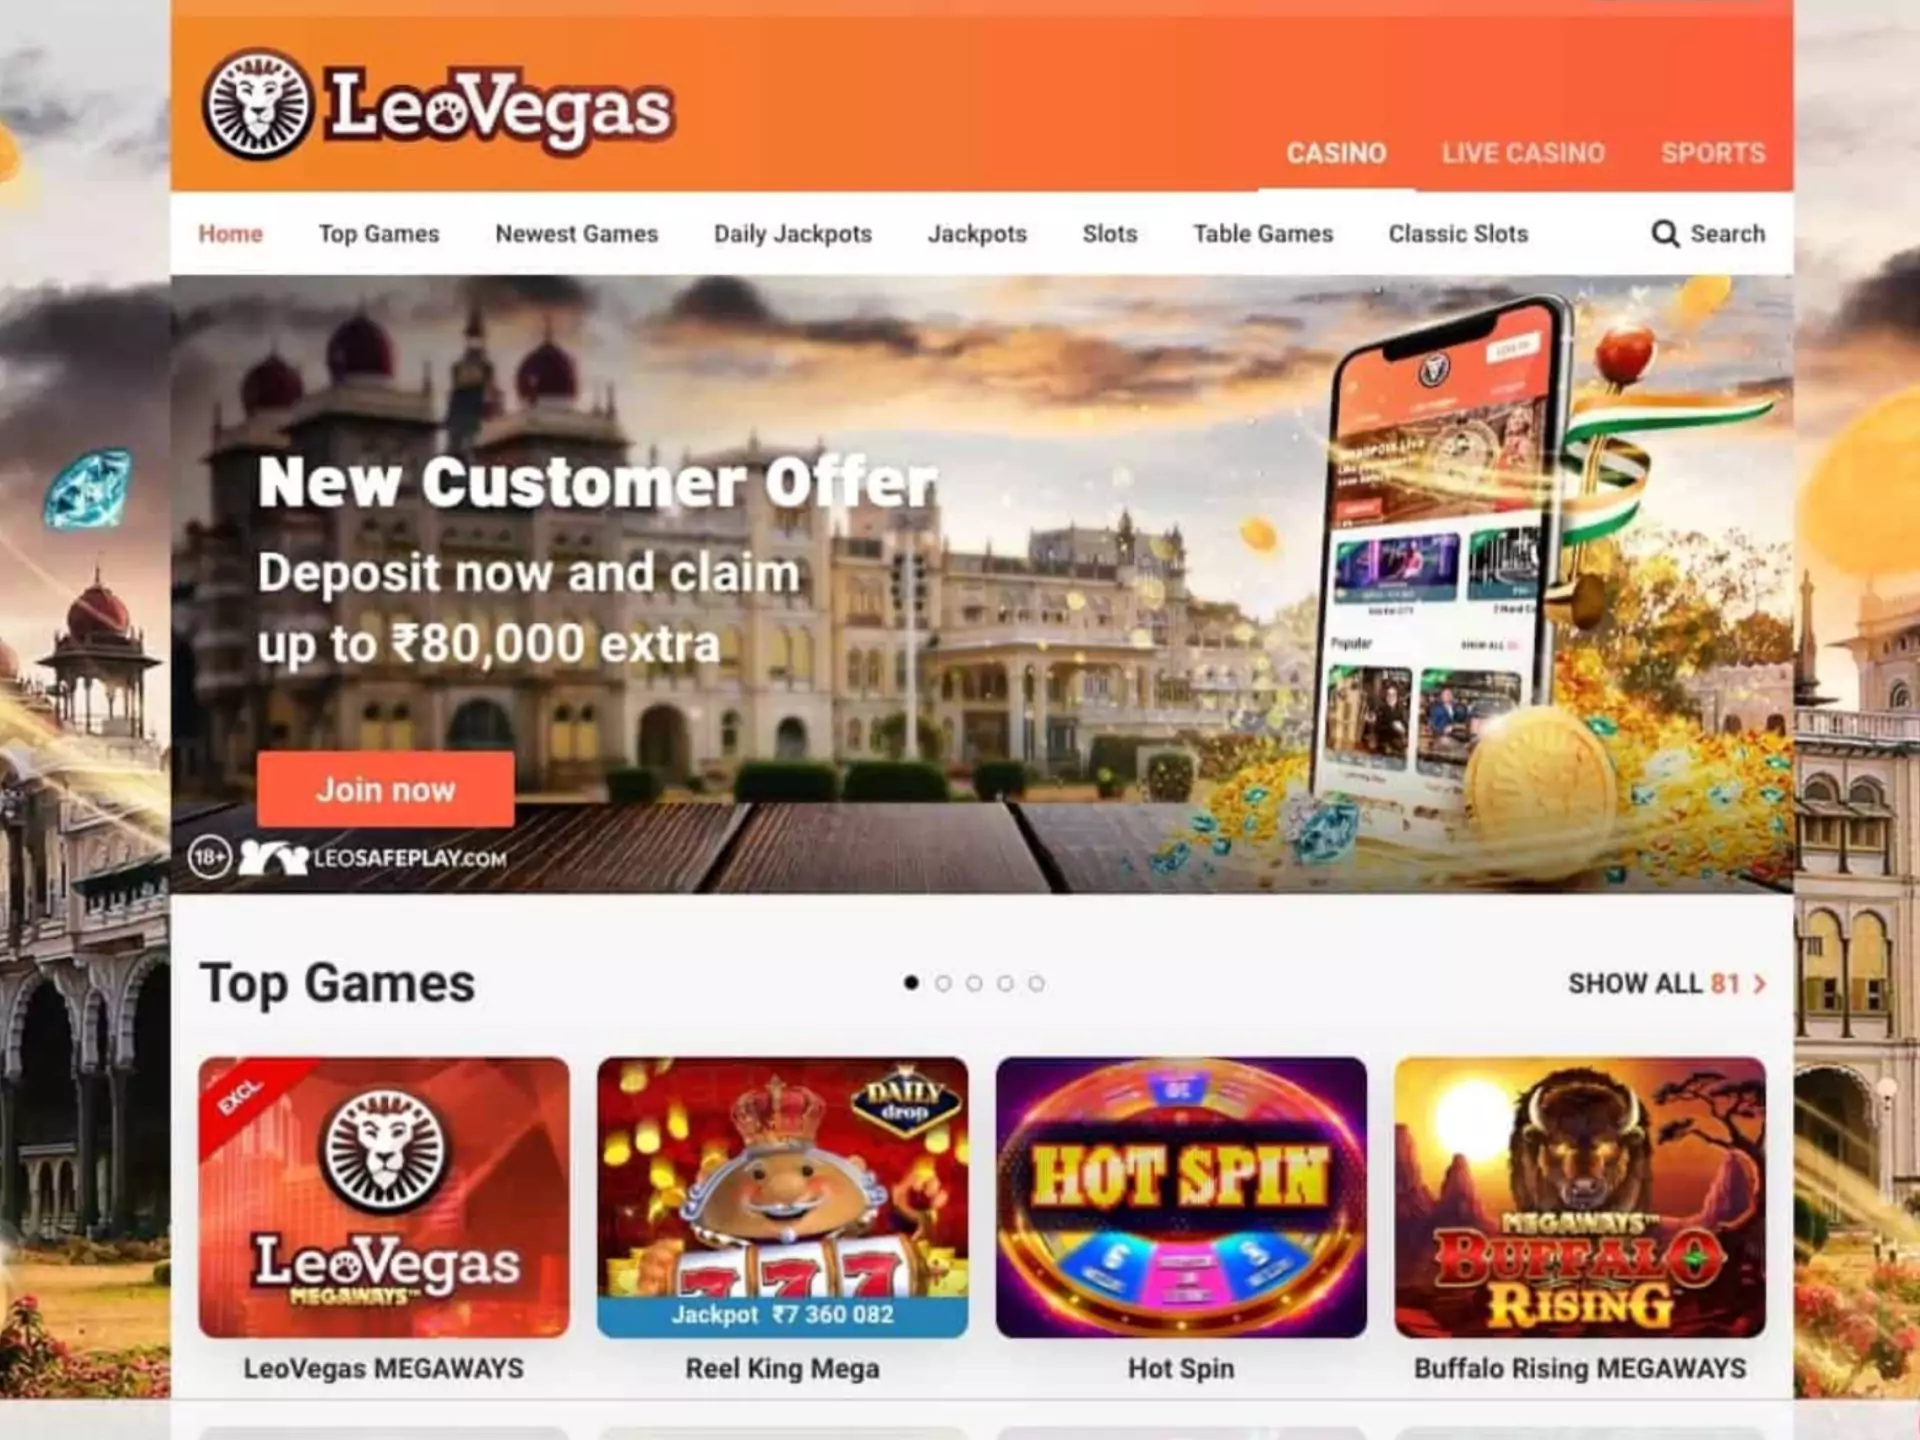 You'll get a welcome bonus after registering and depositing at LeoVegas.